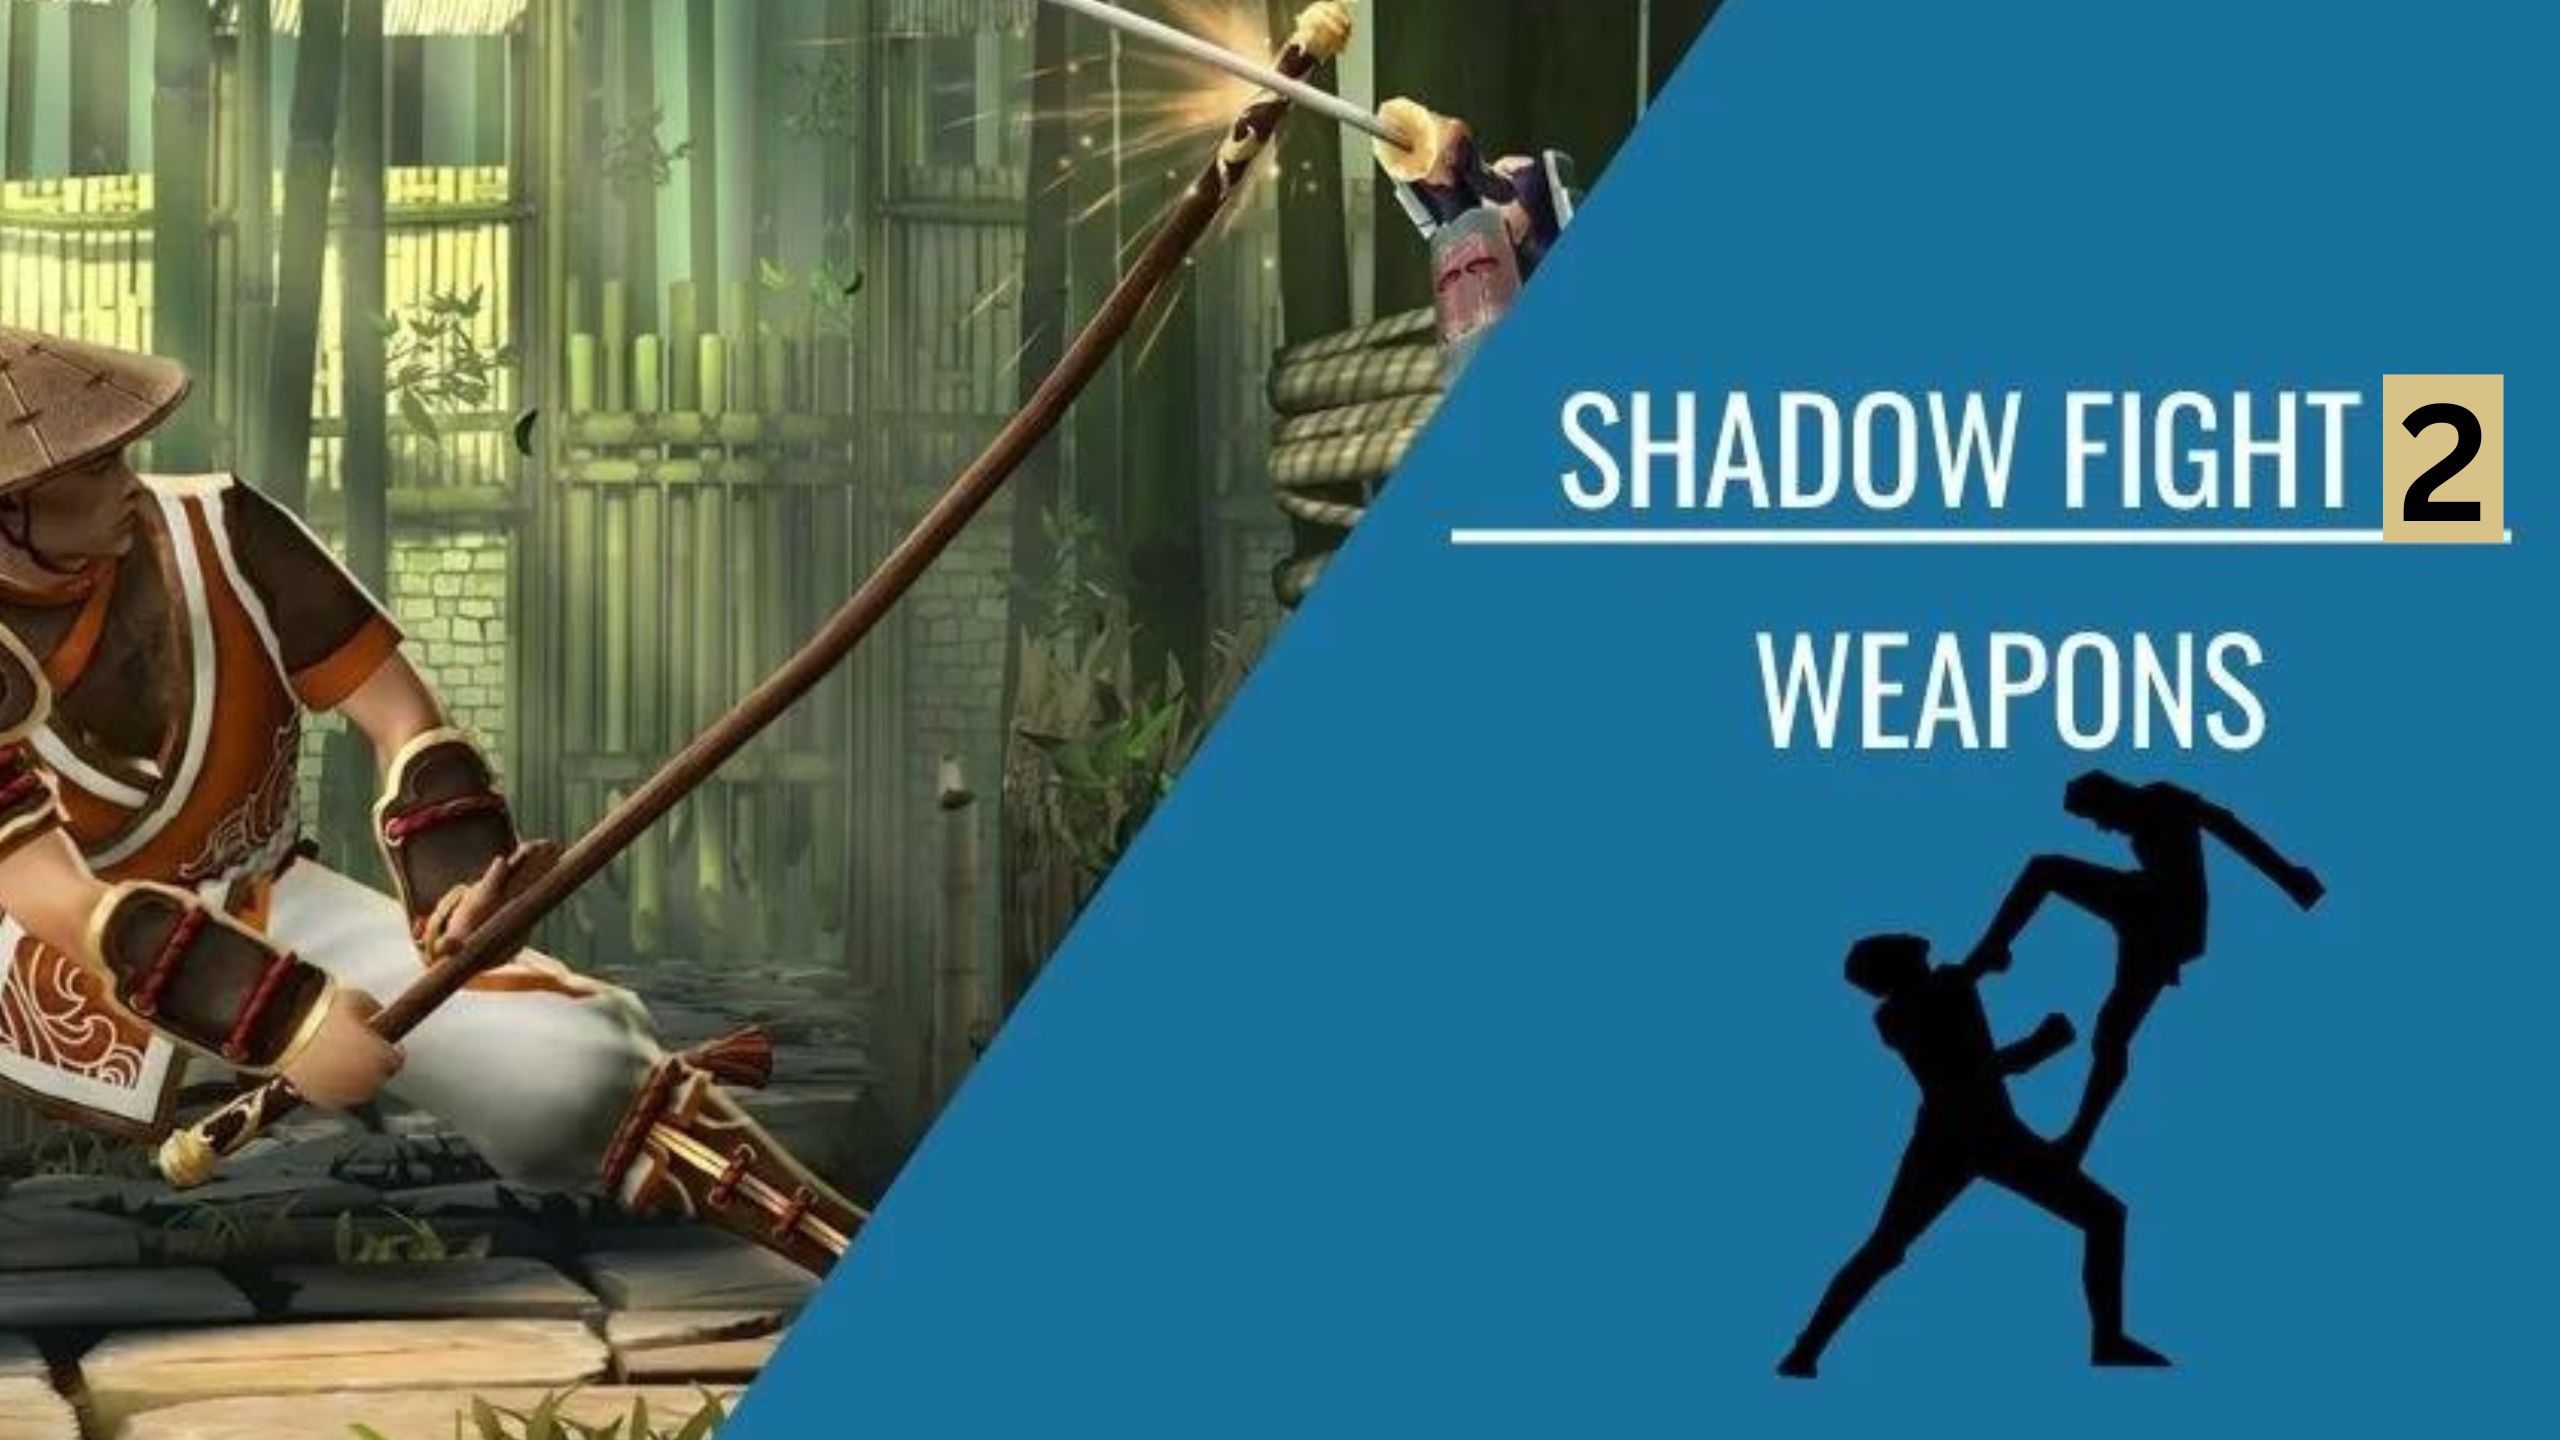 Shadow fight 2 weapons